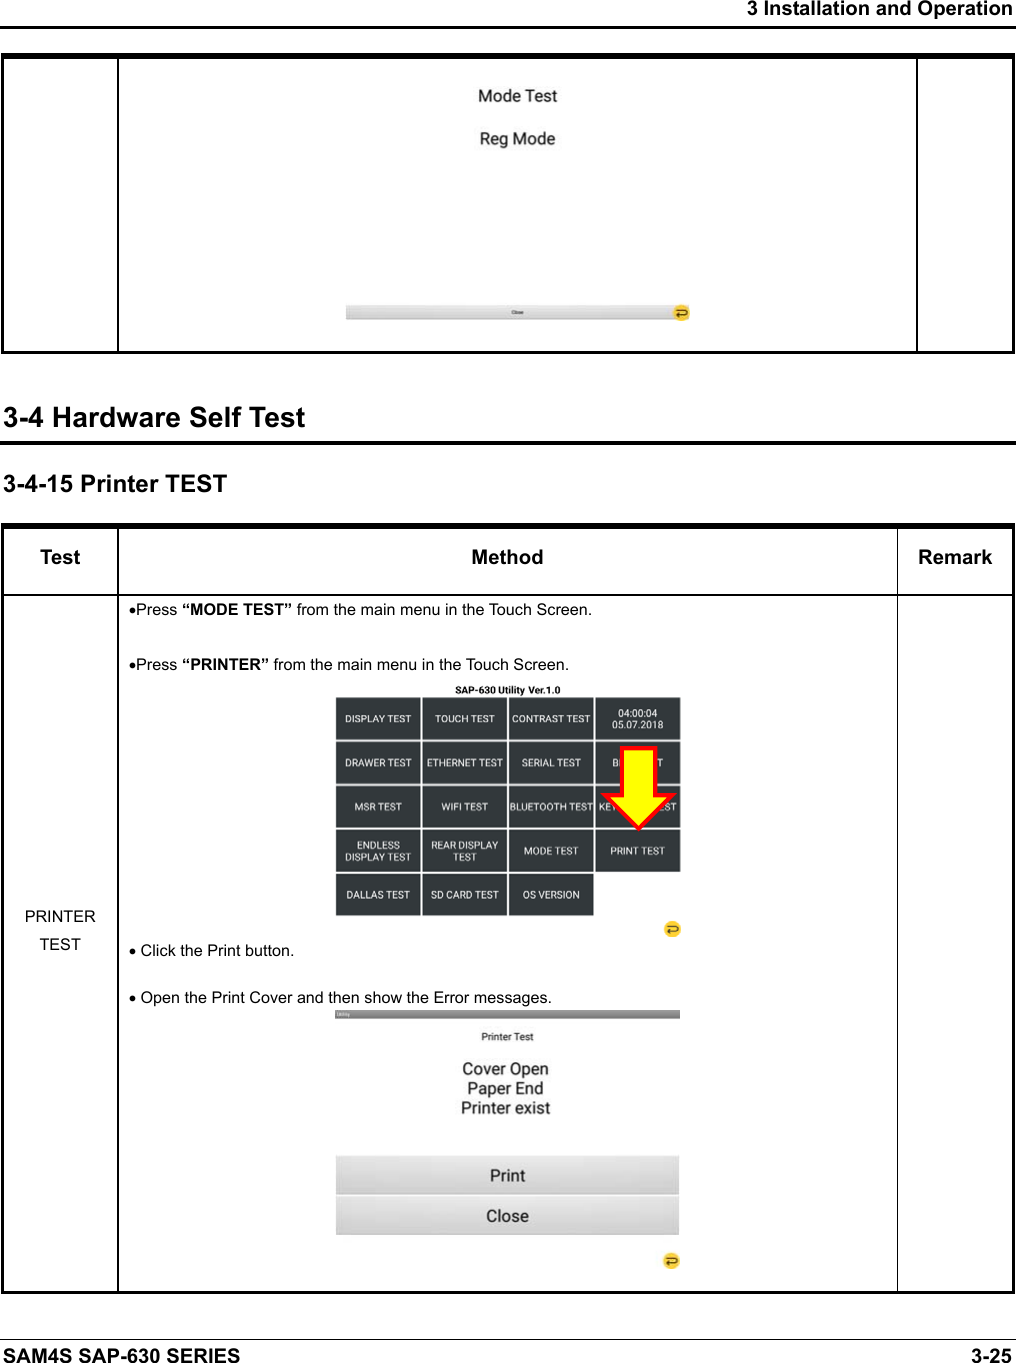 3 Installation and Operation SAM4S SAP-630 SERIES    3-25   3-4 Hardware Self Test 3-4-15 Printer TEST Test  Method  Remark PRINTER TEST Press “MODE TEST” from the main menu in the Touch Screen. Press “PRINTER” from the main menu in the Touch Screen.   Click the Print button.   Open the Print Cover and then show the Error messages.     